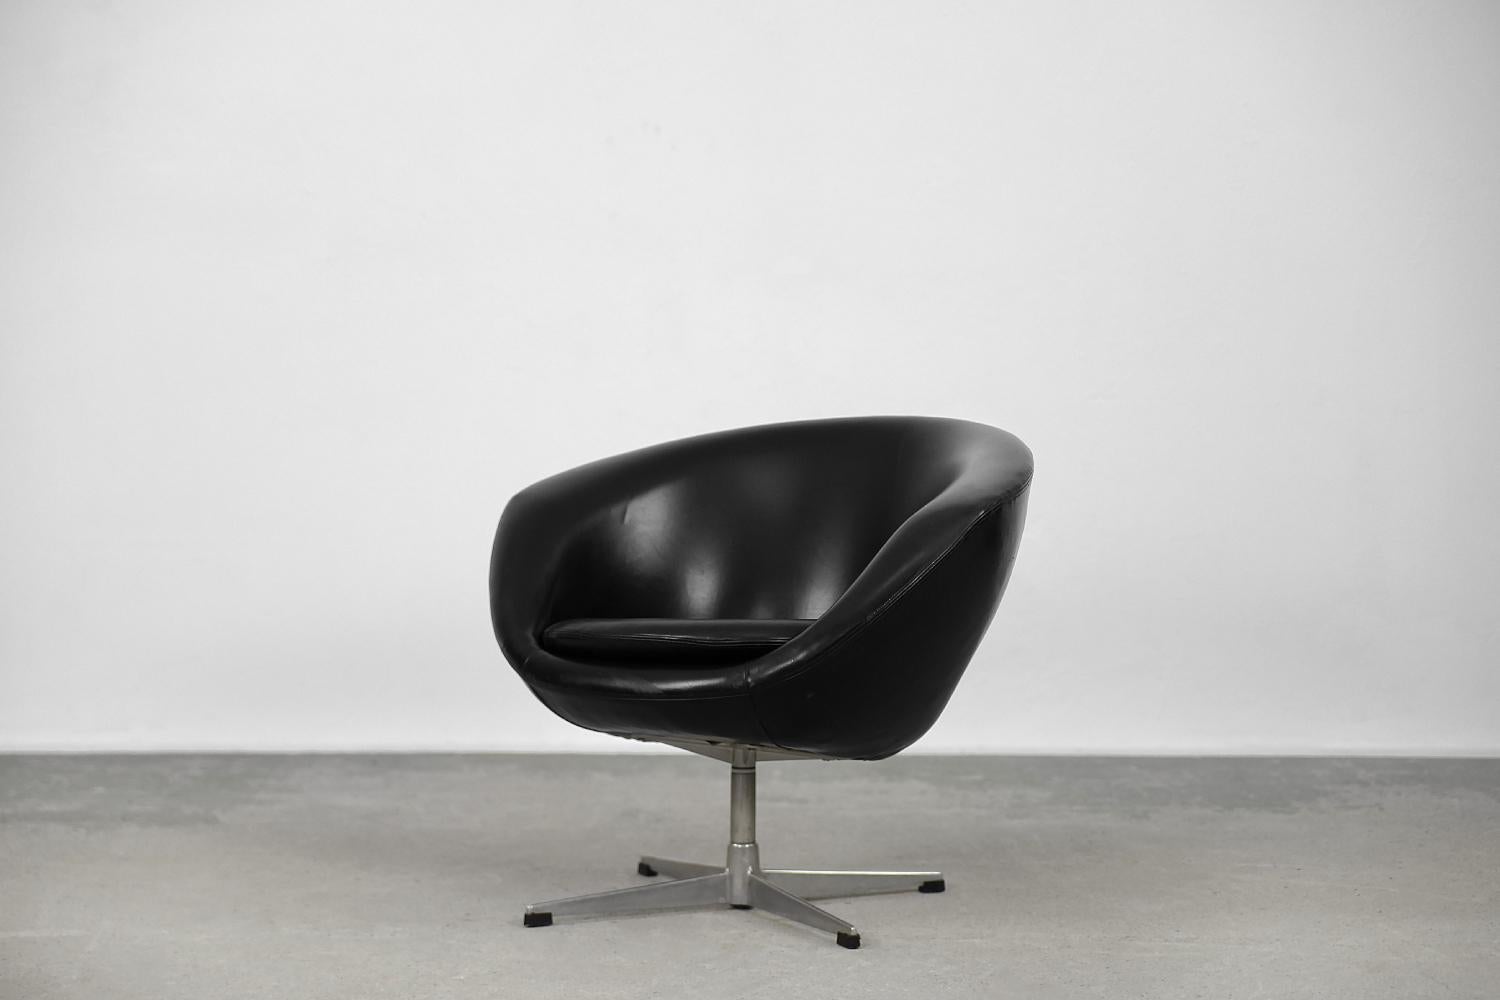 This Rondo swivel armchair was manufactured by the Swedish S.M. Wincrantz Möbelindustri AB, Skövde during the 1960s. The armchair has a bucket-shaped form and is upholstered with black vinyl. TIt has a metal swivel leg. The deep seat has a loose